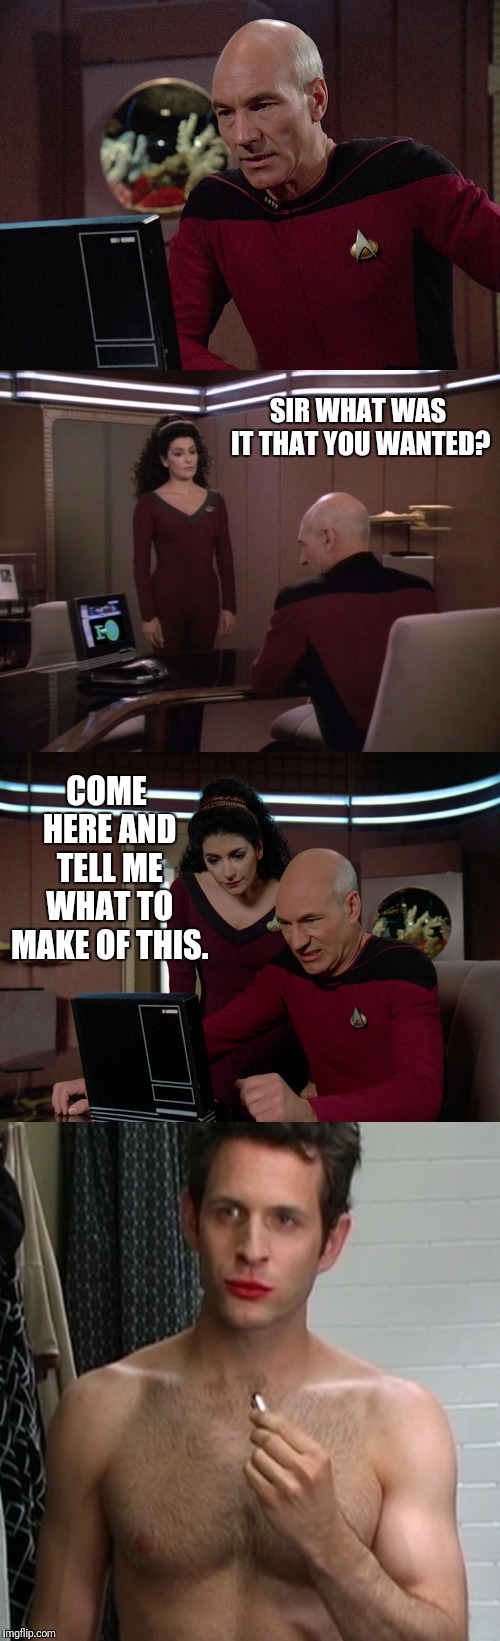 Picards Confused | SIR WHAT WAS IT THAT YOU WANTED? COME HERE AND TELL ME WHAT TO MAKE OF THIS. | image tagged in star trek the next generation,star trek tng,picard,captain picard,deanna troi,it's always sunny in philidelphia | made w/ Imgflip meme maker